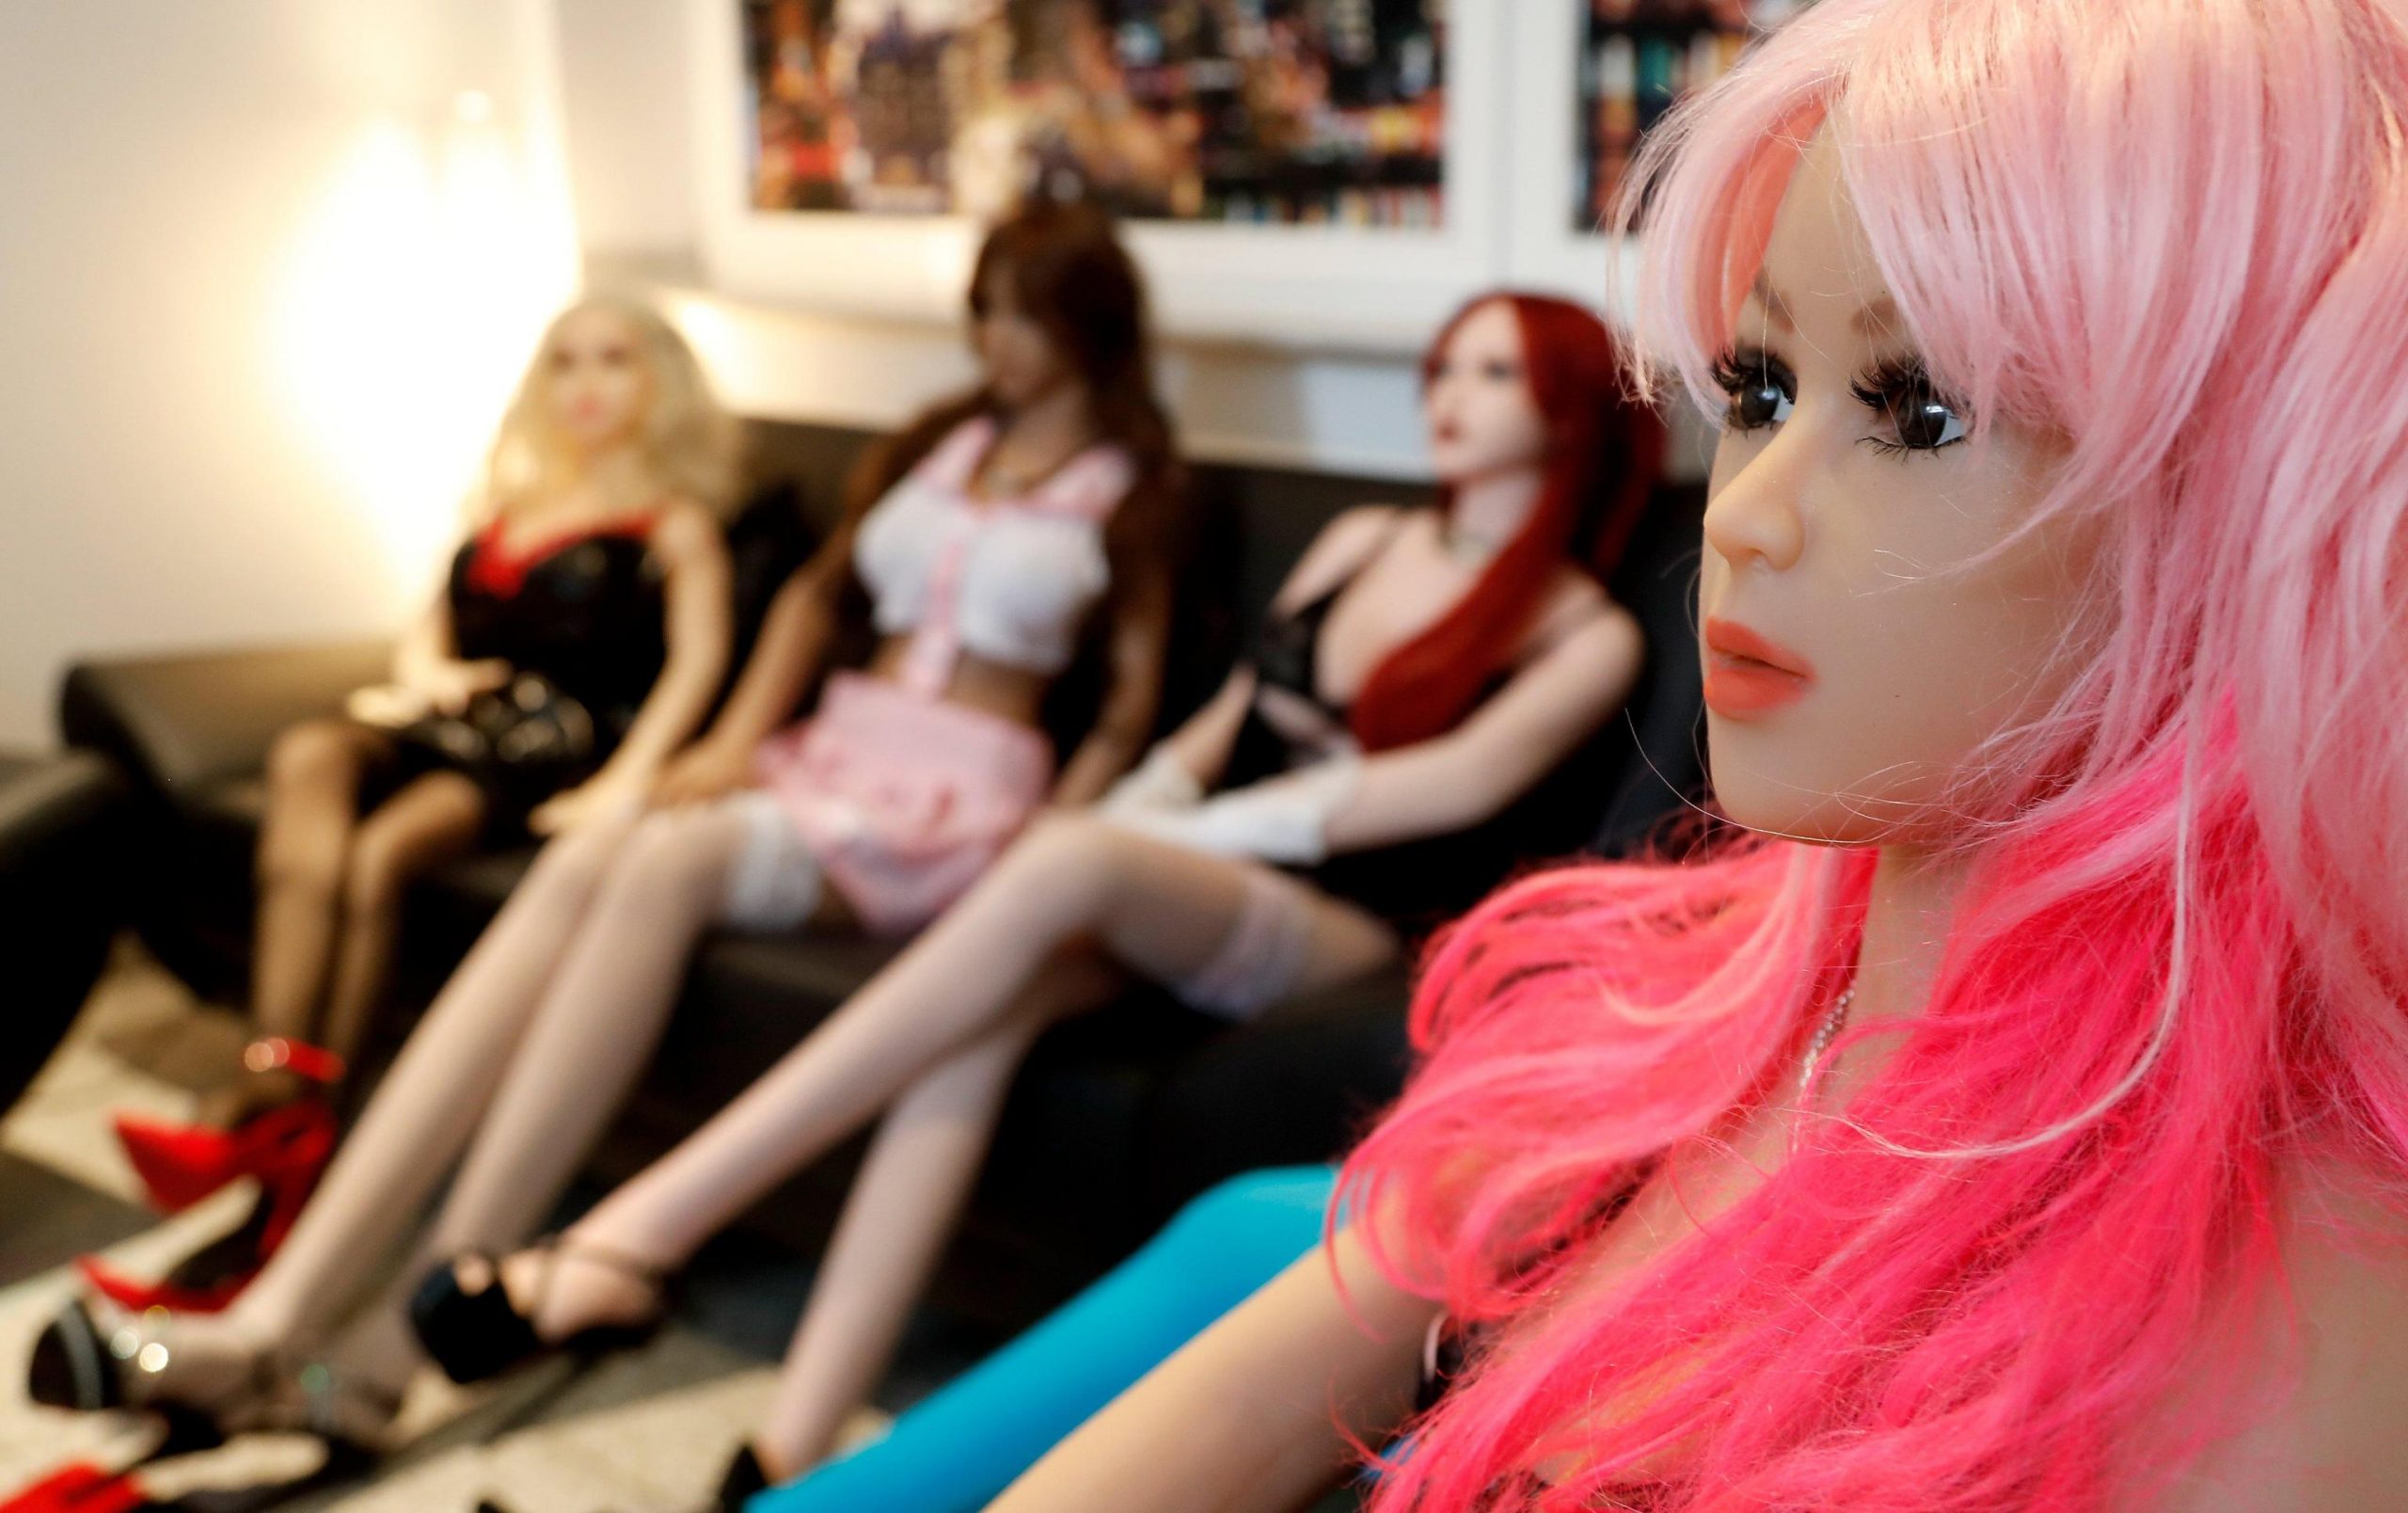 First Sex Doll Brothel Opens In Germany